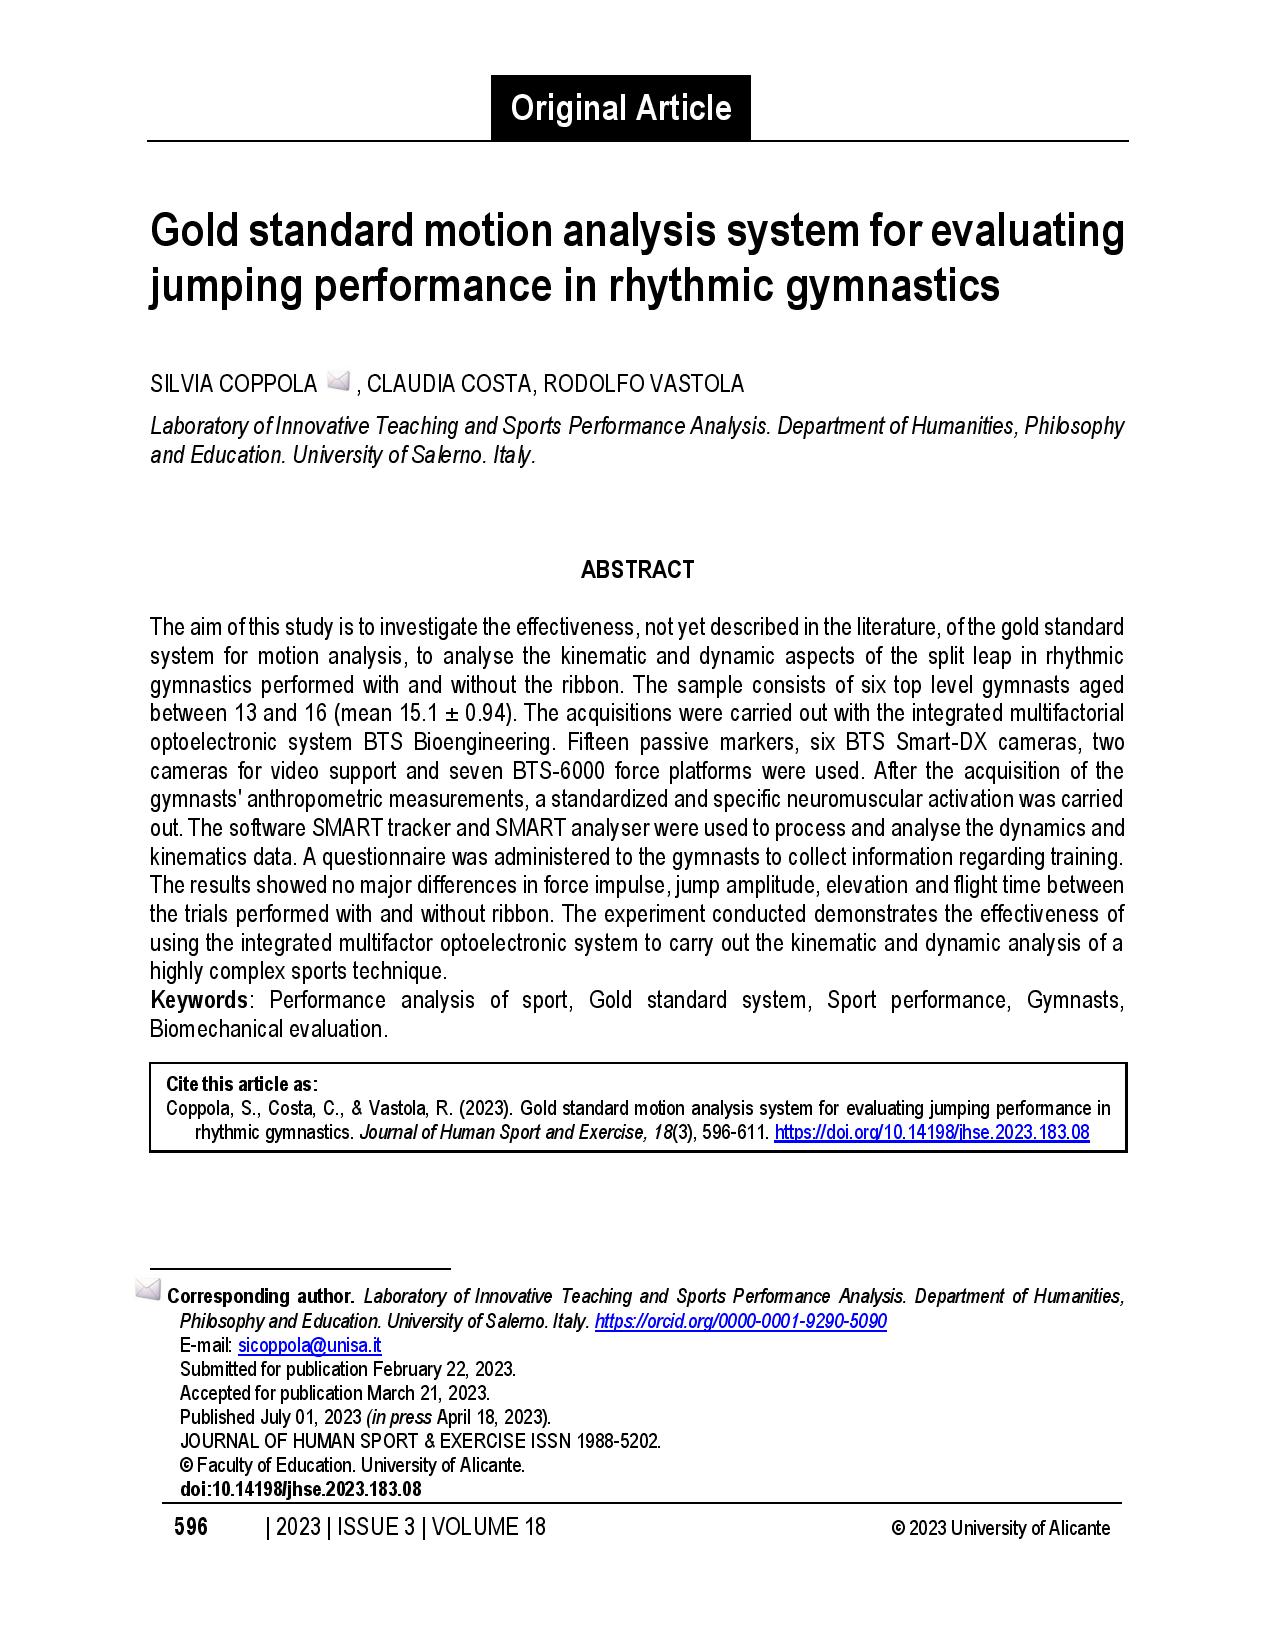 Gold standard motion analysis system for evaluating jumping performance in rhythmic gymnastics